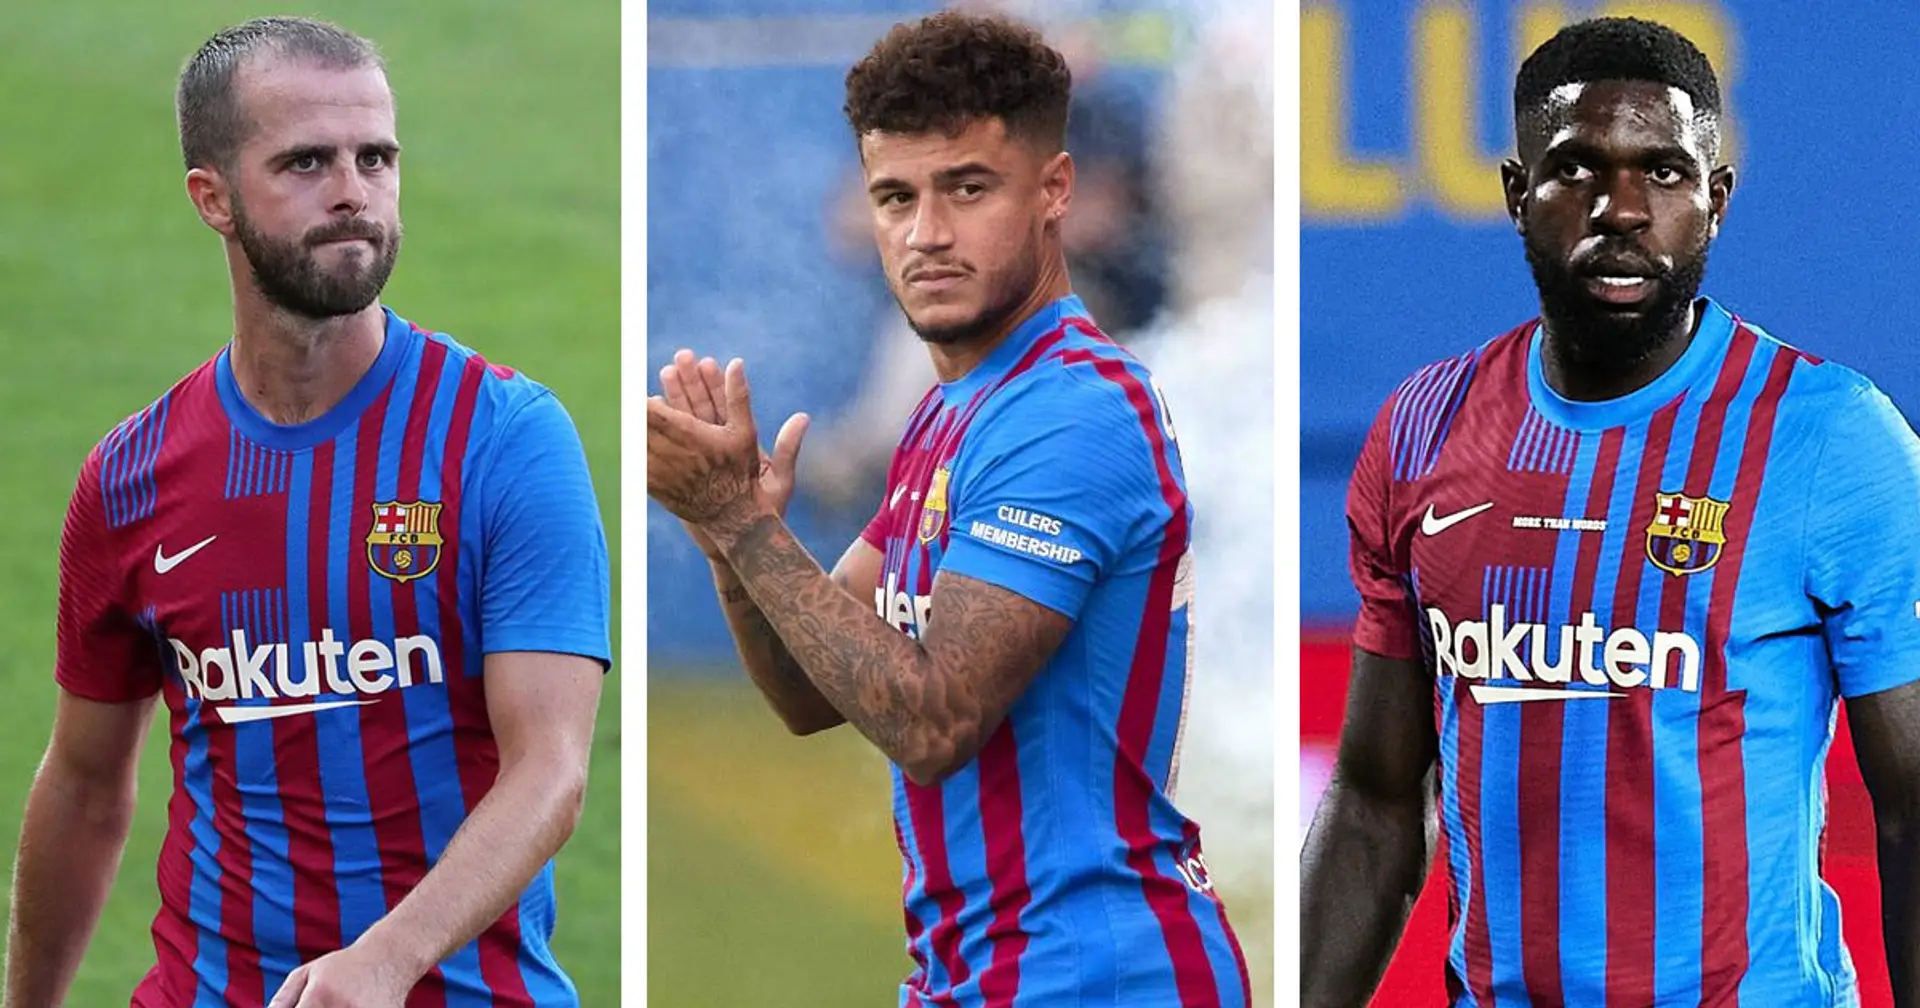 Coutinho, Umtiti and Pjanic dropped for Real Sociedad match as Barca plan on selling them (reliability: 5 stars)